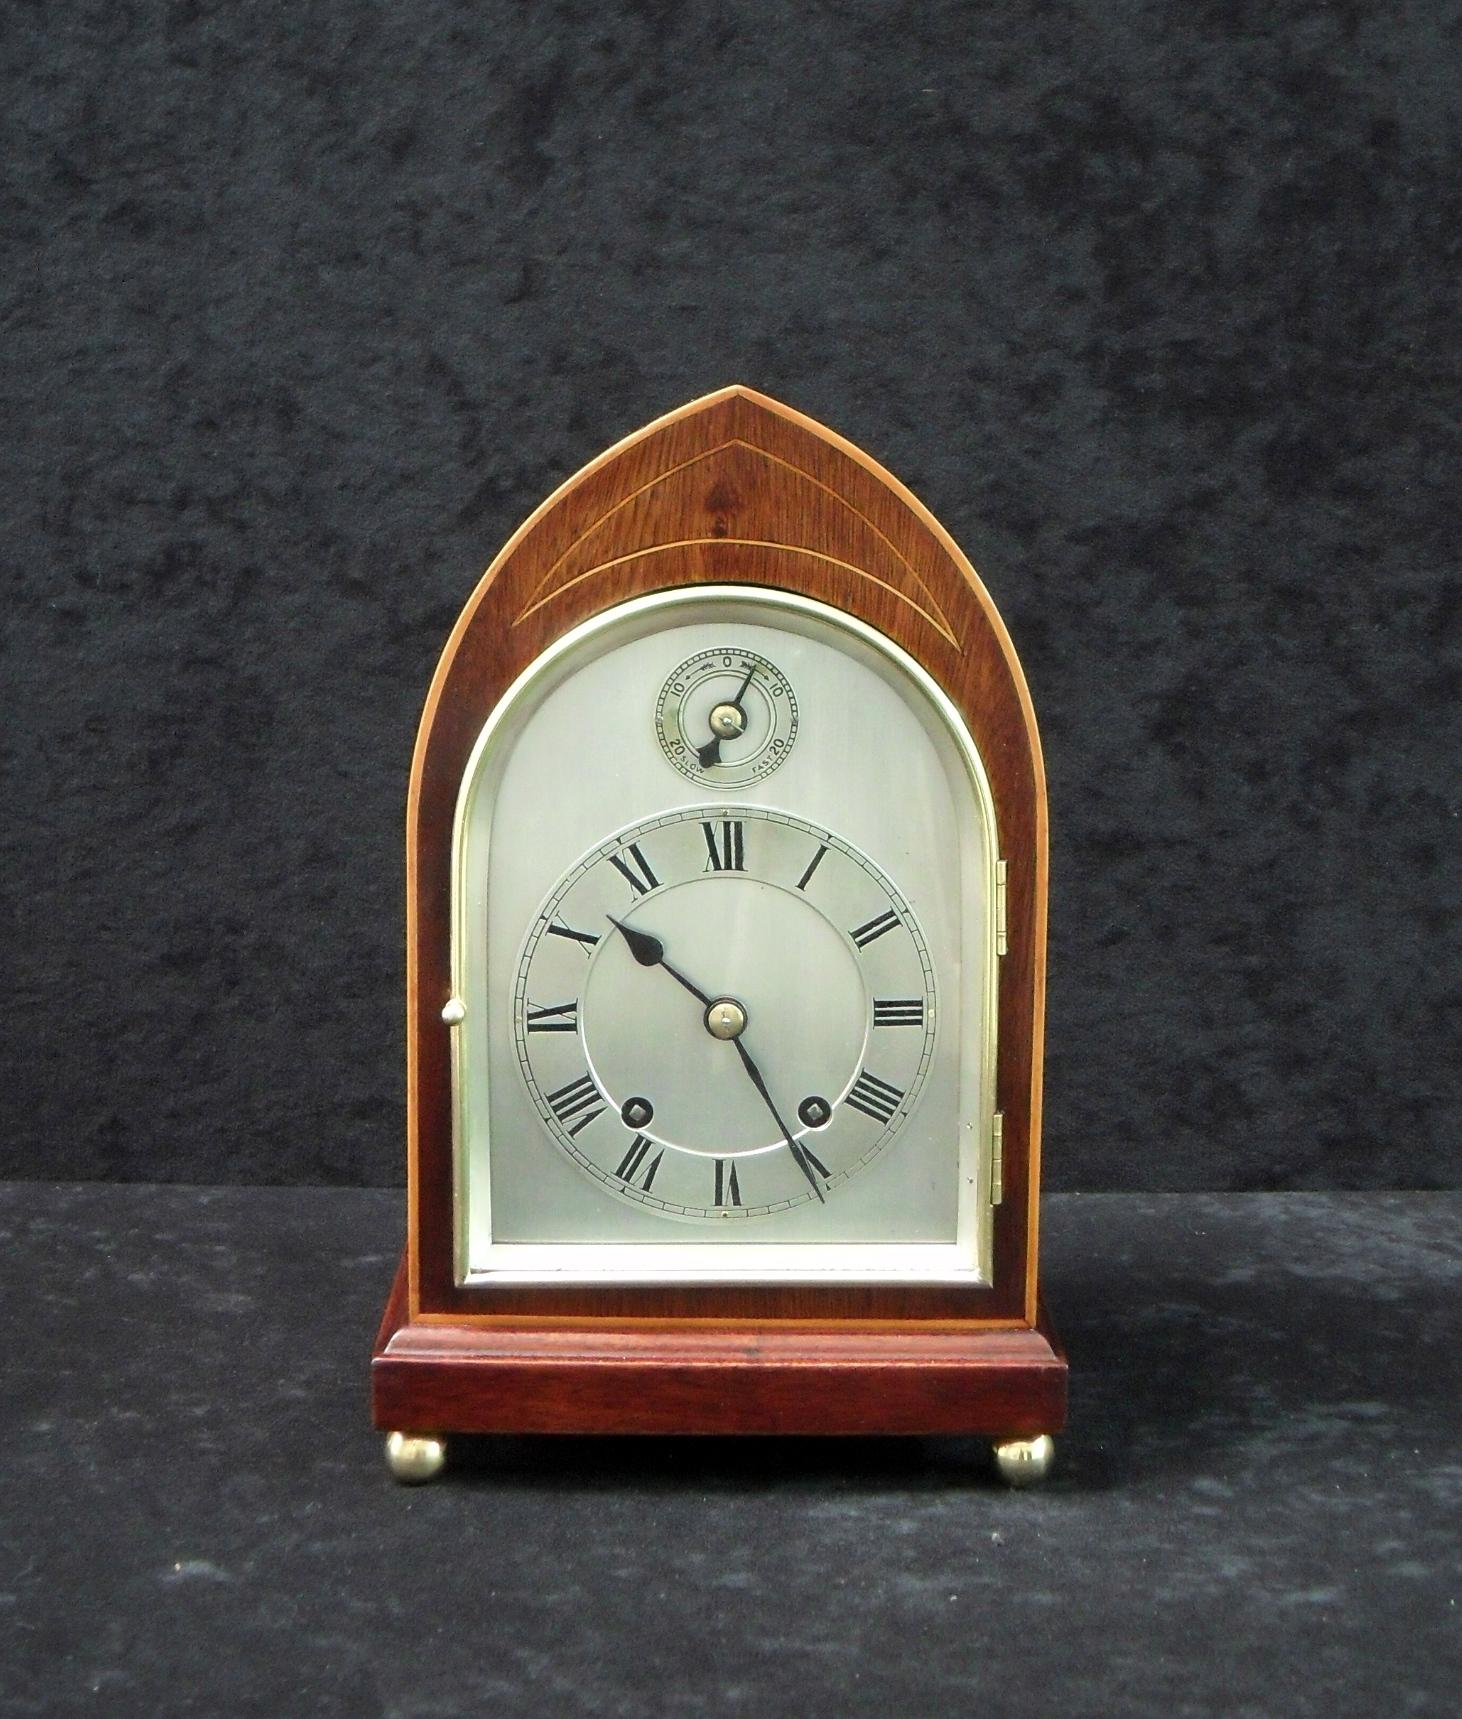 A very good quality late Victorian figured mahogany lancet top mantel clock with boxwood stringing to the front of the case stood on brass ball feet.

The clock has a silvered dial with a slow-fast mechanism and has a German Winterhalder &